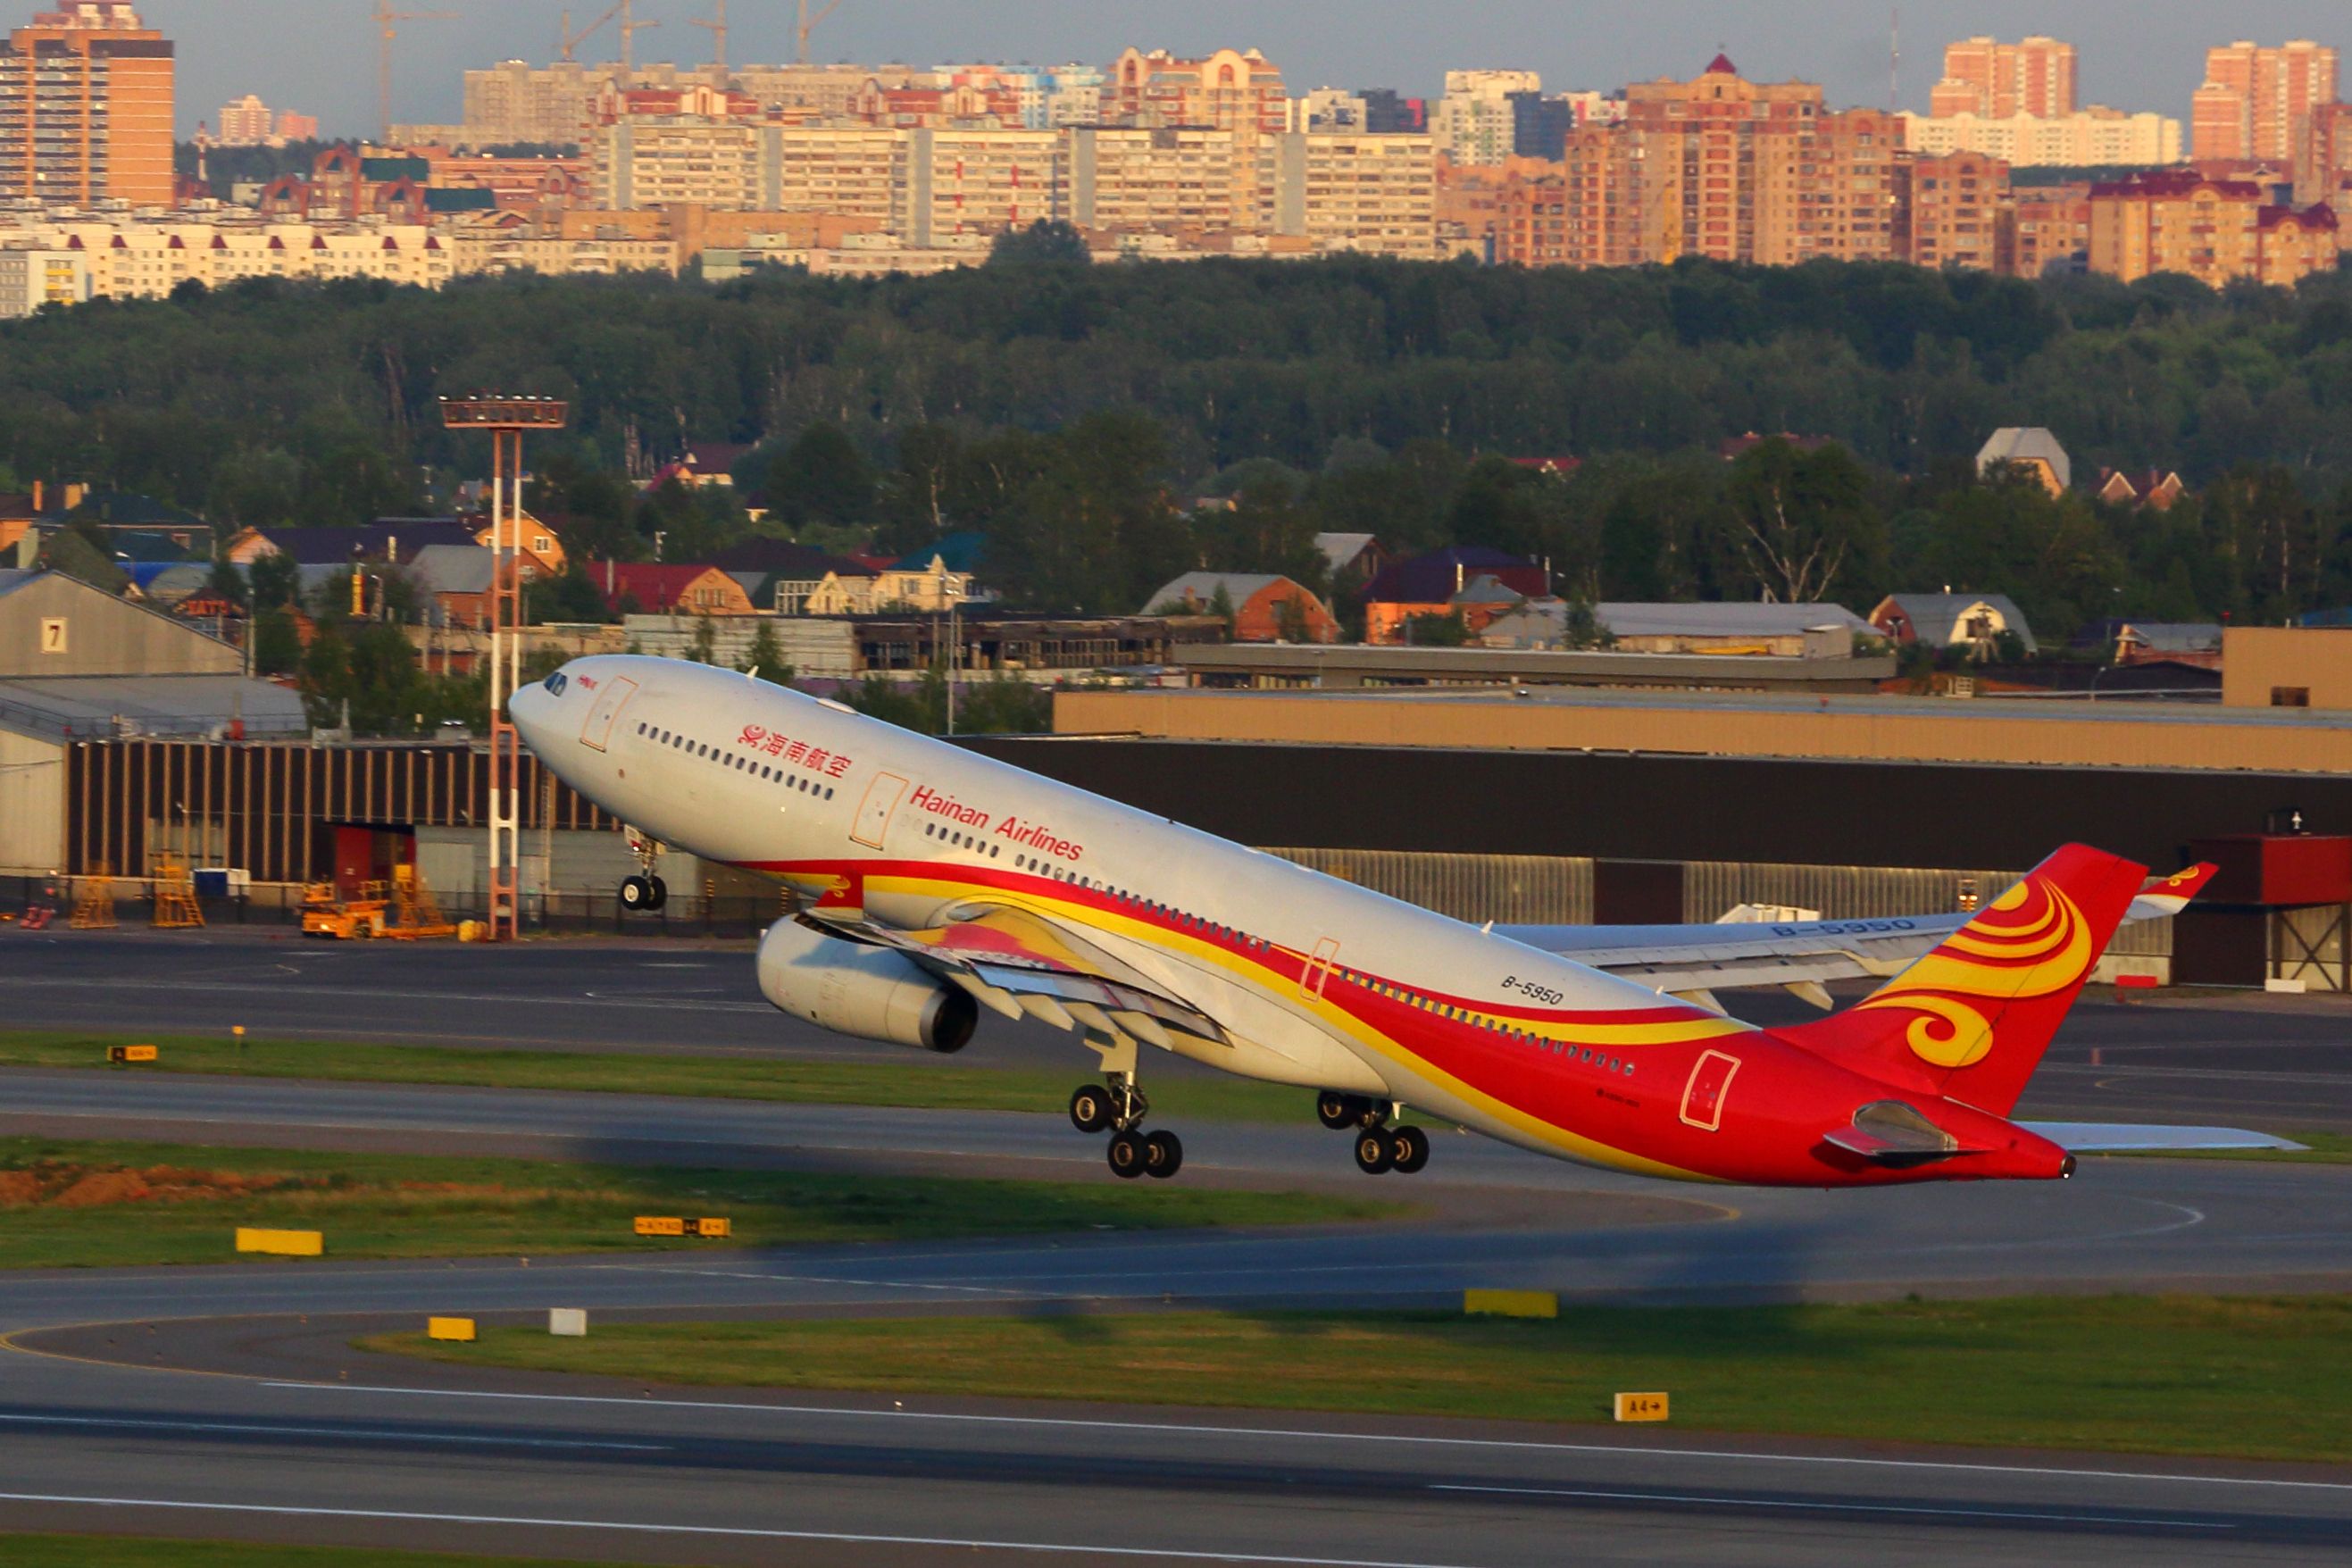 Hainan Airlines Airbus A330-300, registration B-5950, taking off.